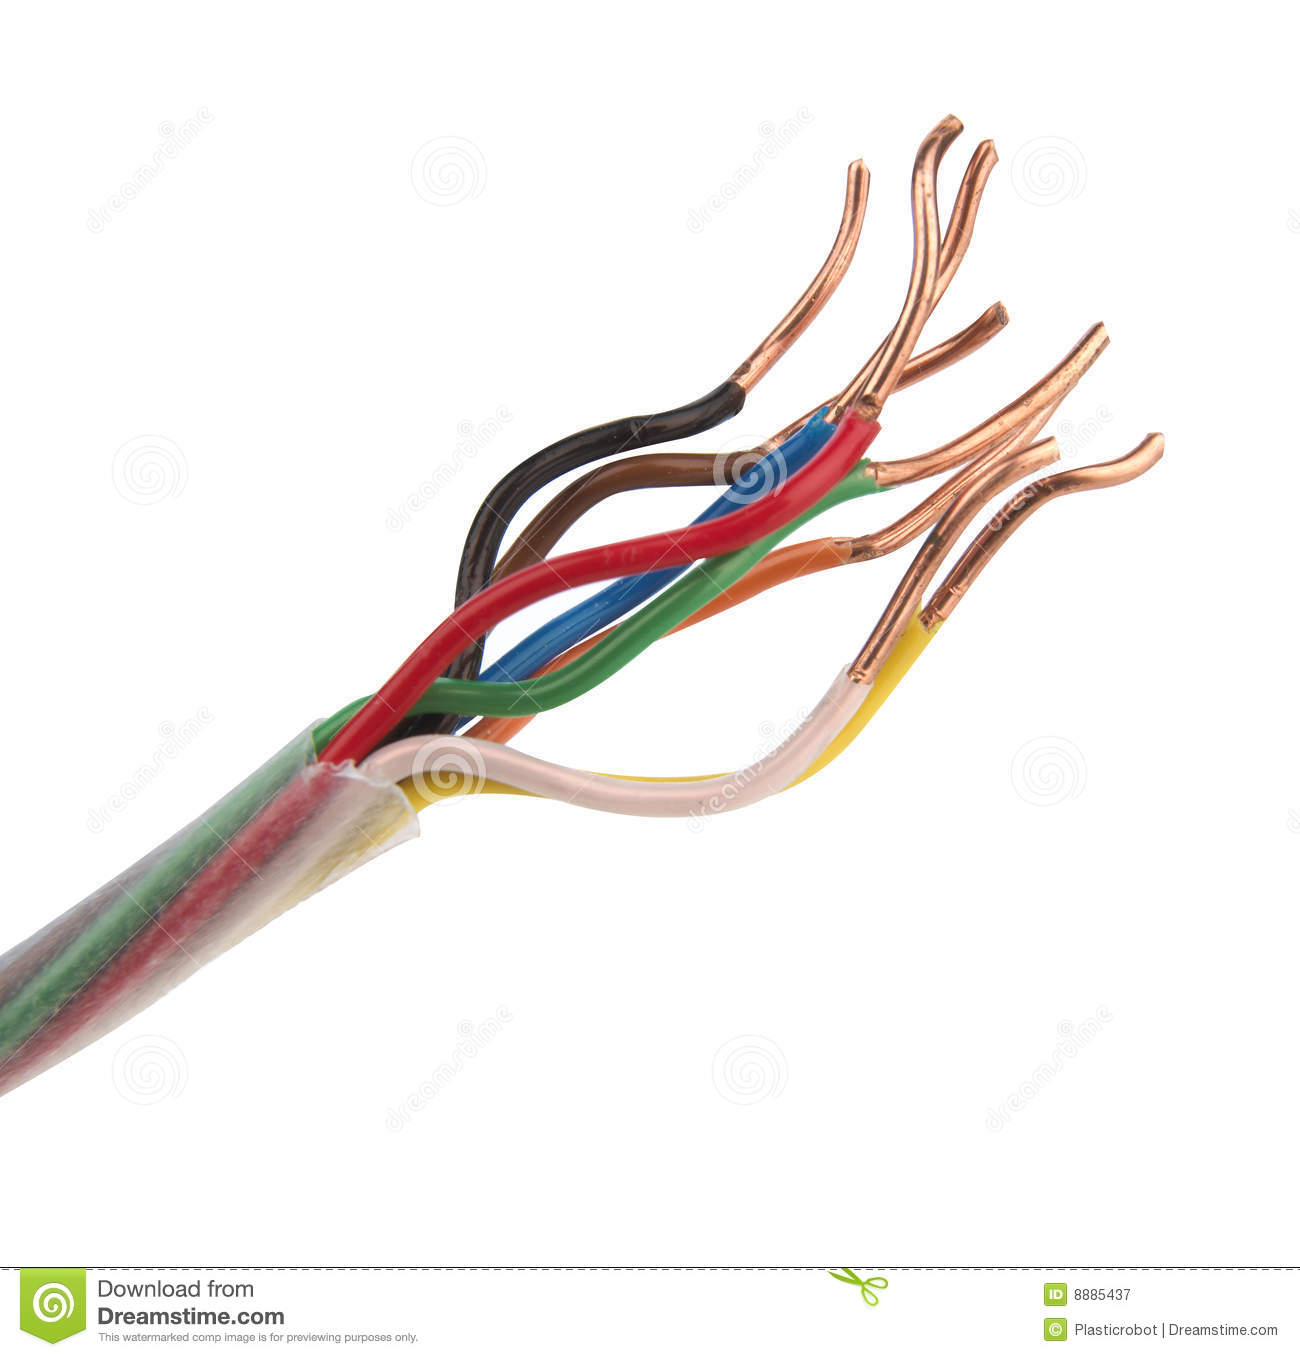 Coded Electrical Wires Twisted Into An Electrical Or Network Cable